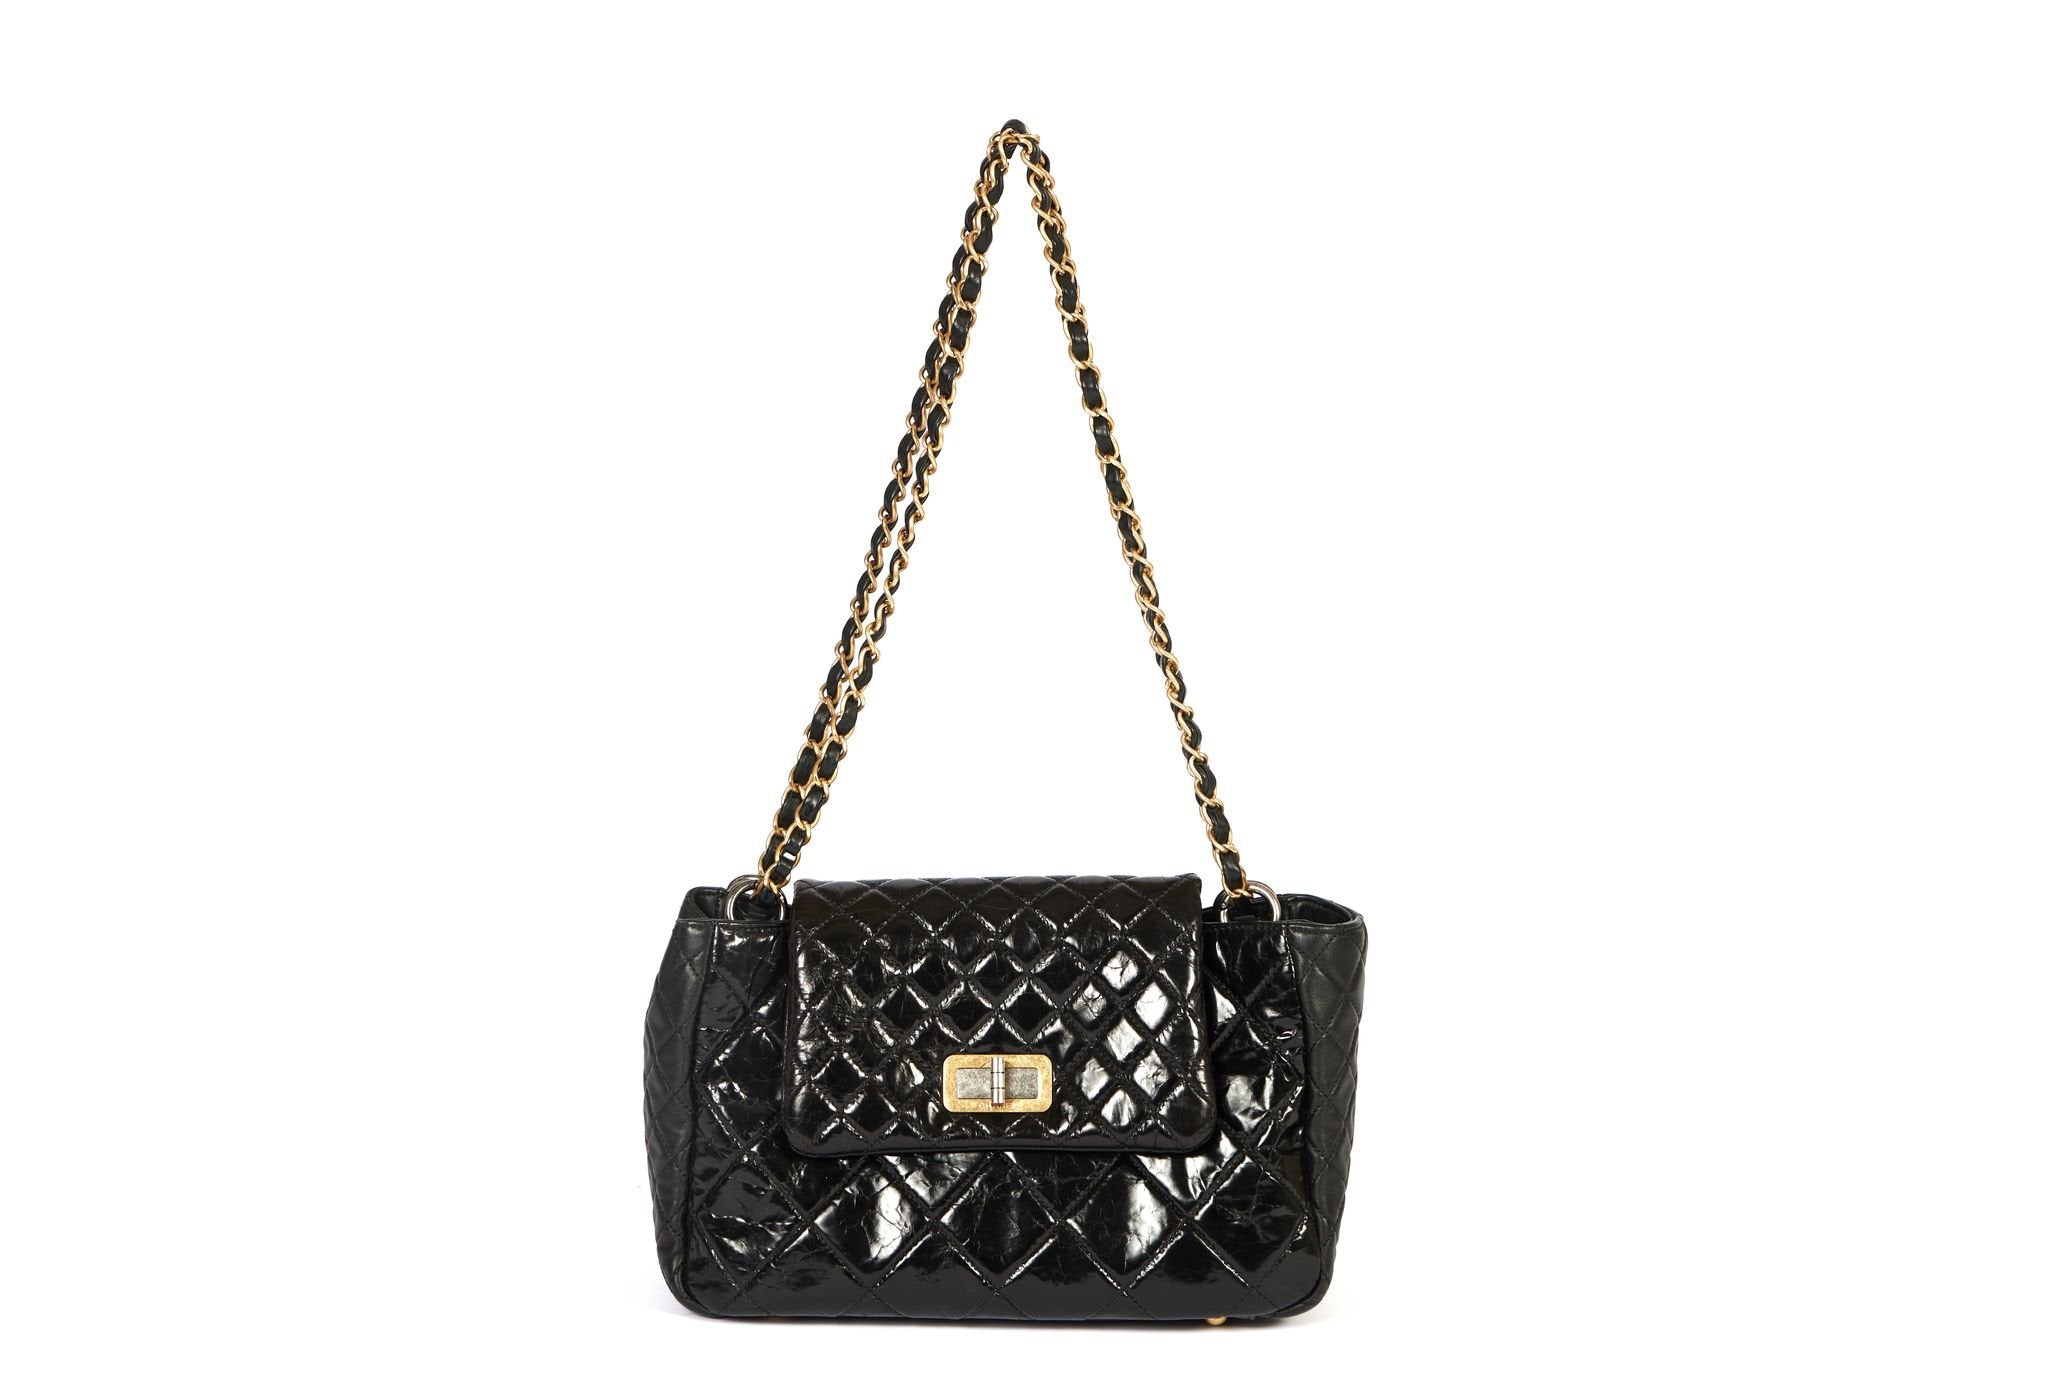 Chanel Black Quilted Patent Leather Medium Classic Double Flap Bag, myGemma